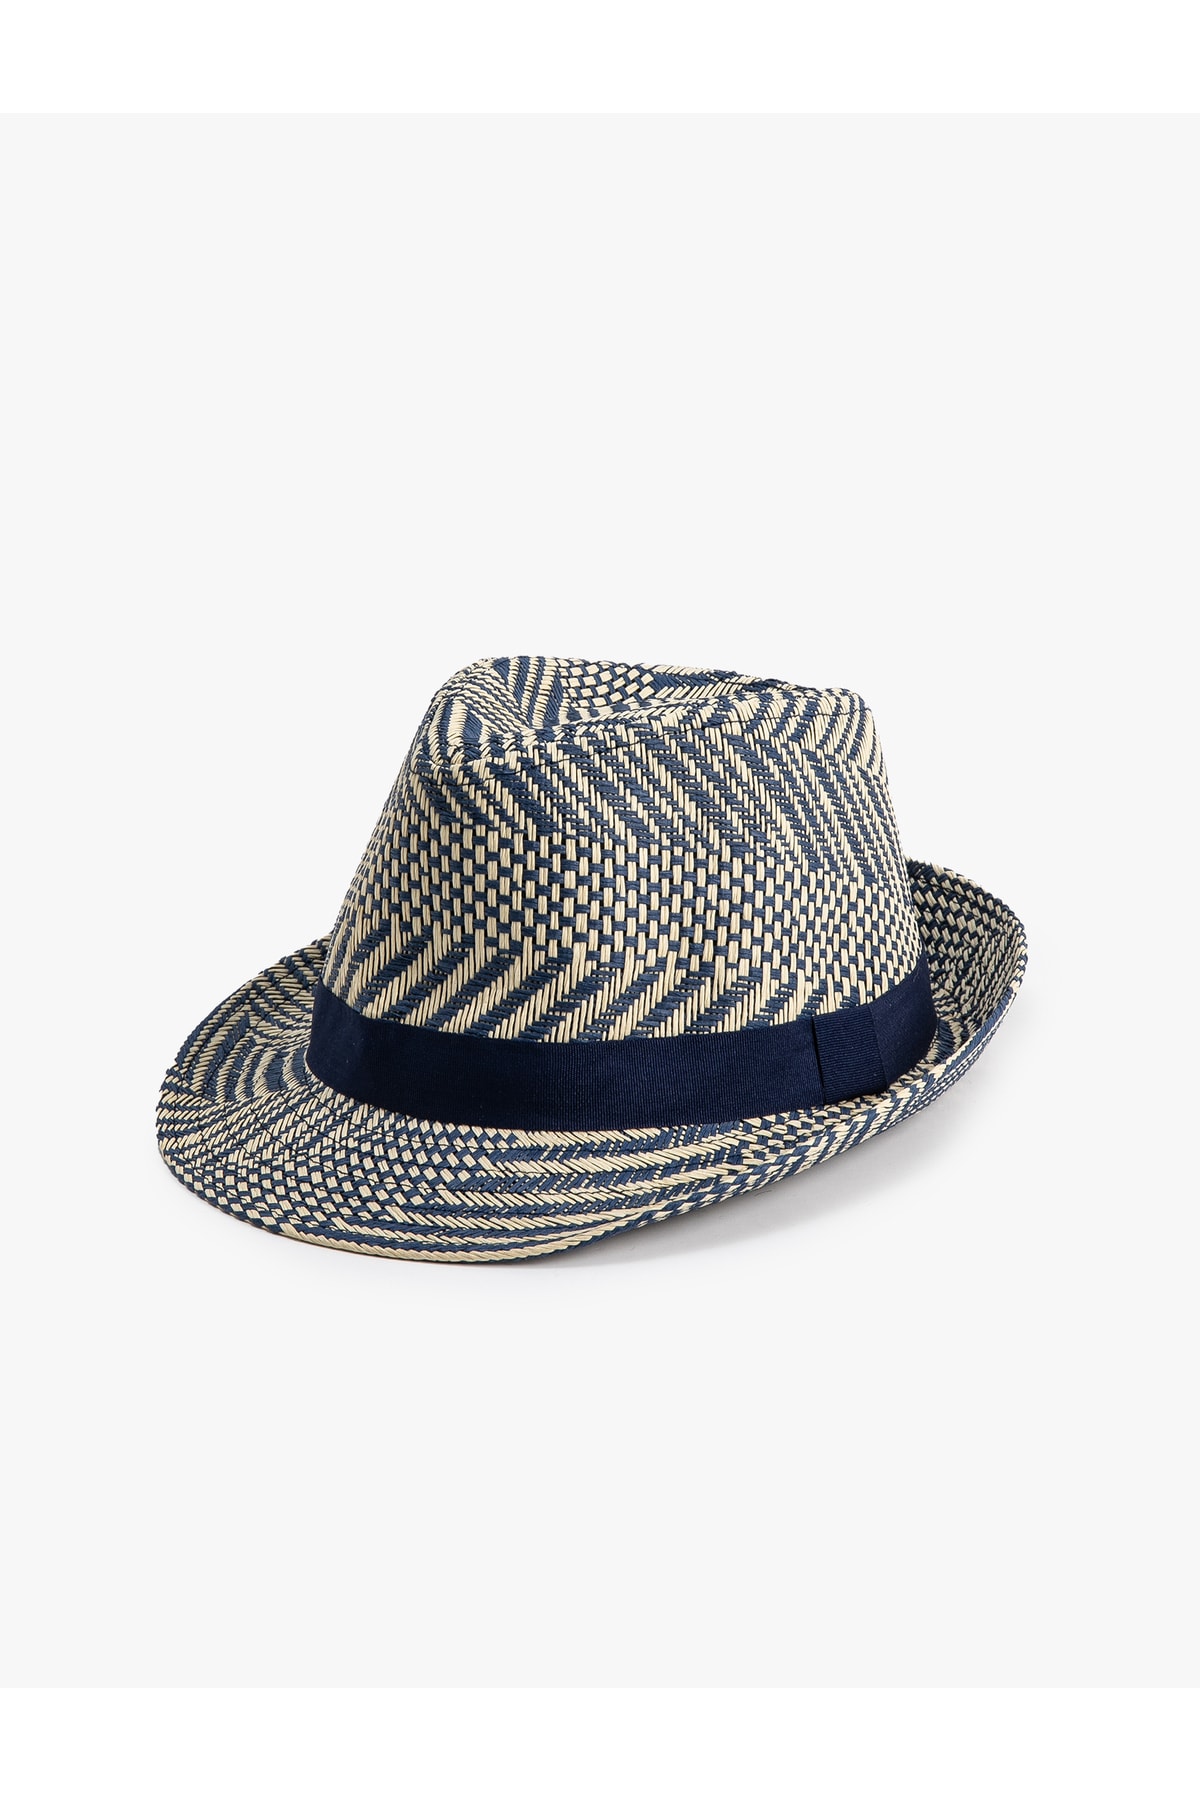 Koton Straw Fedora Hat with Band Detail and Knitted Motif